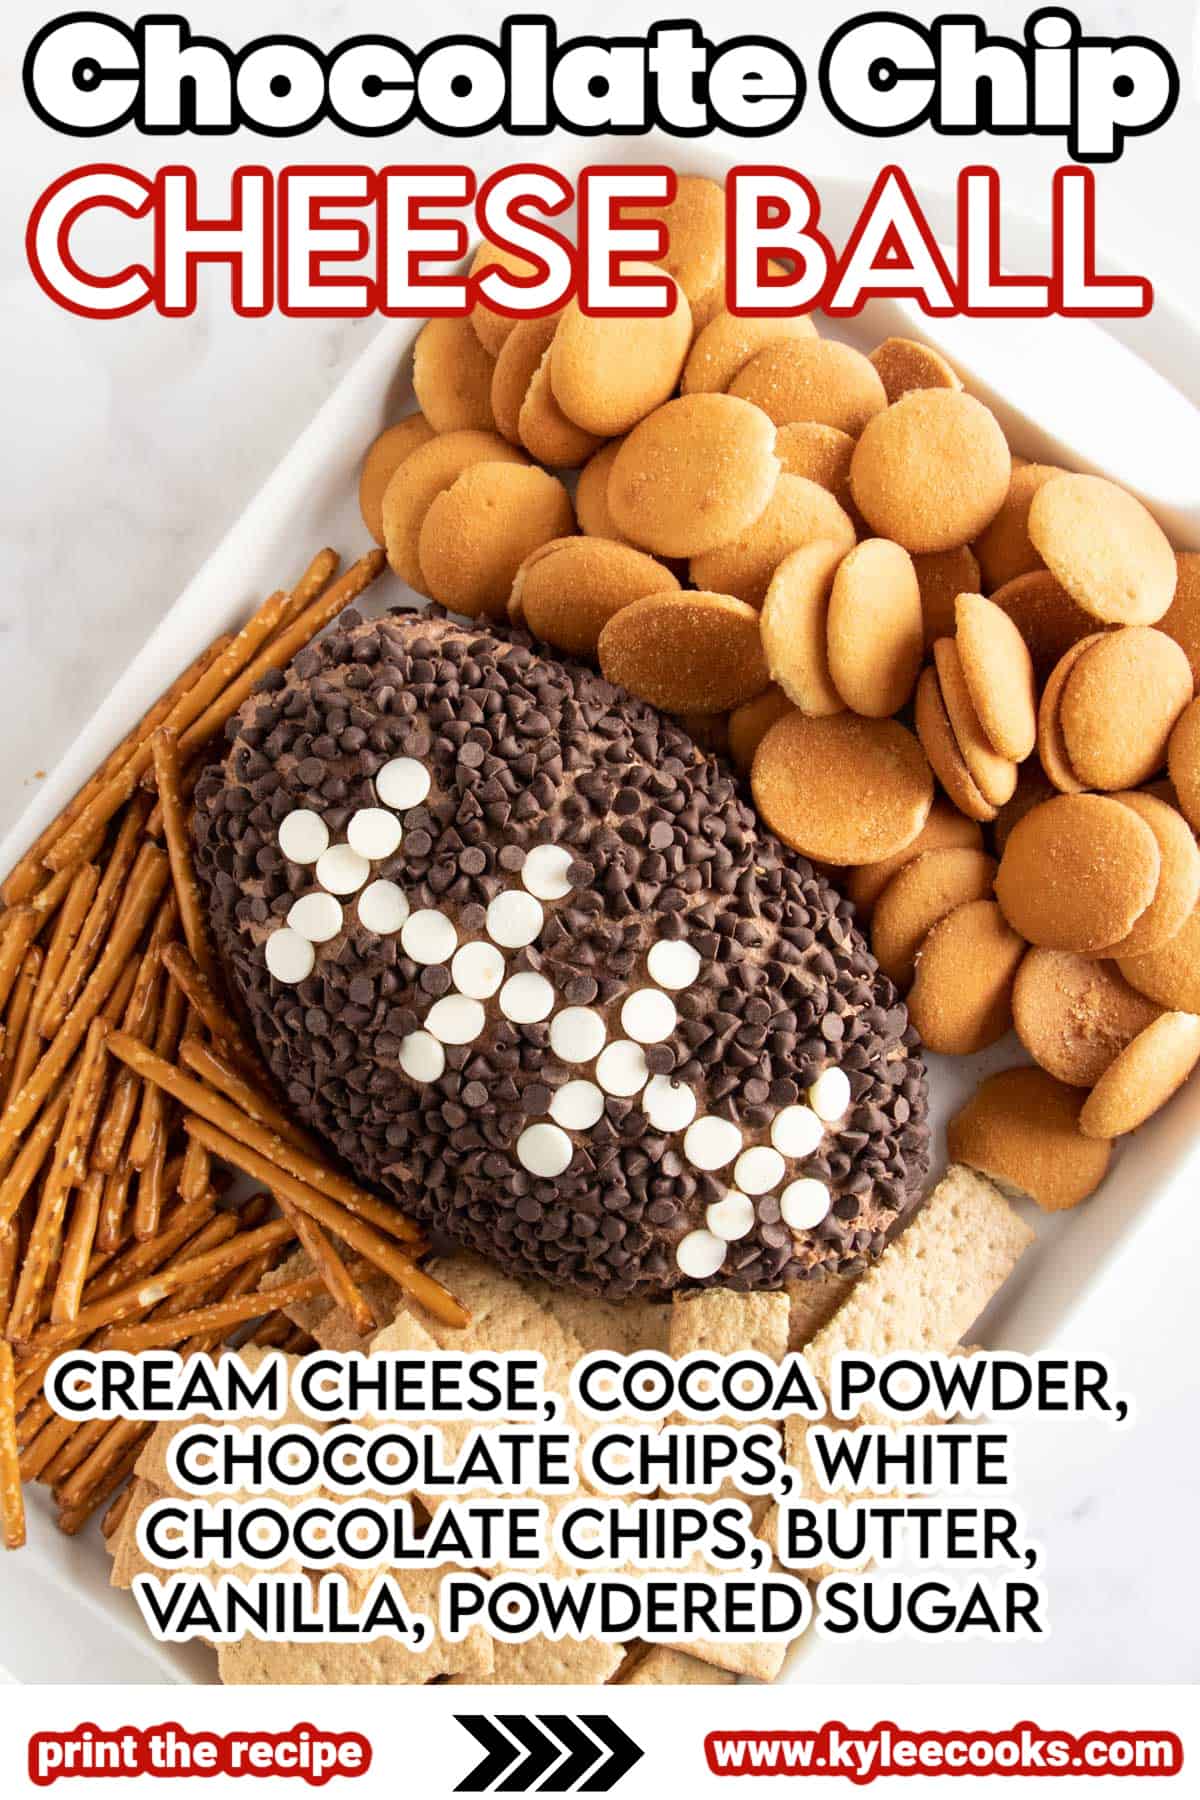 chocolate chip cheese ball with text overlay